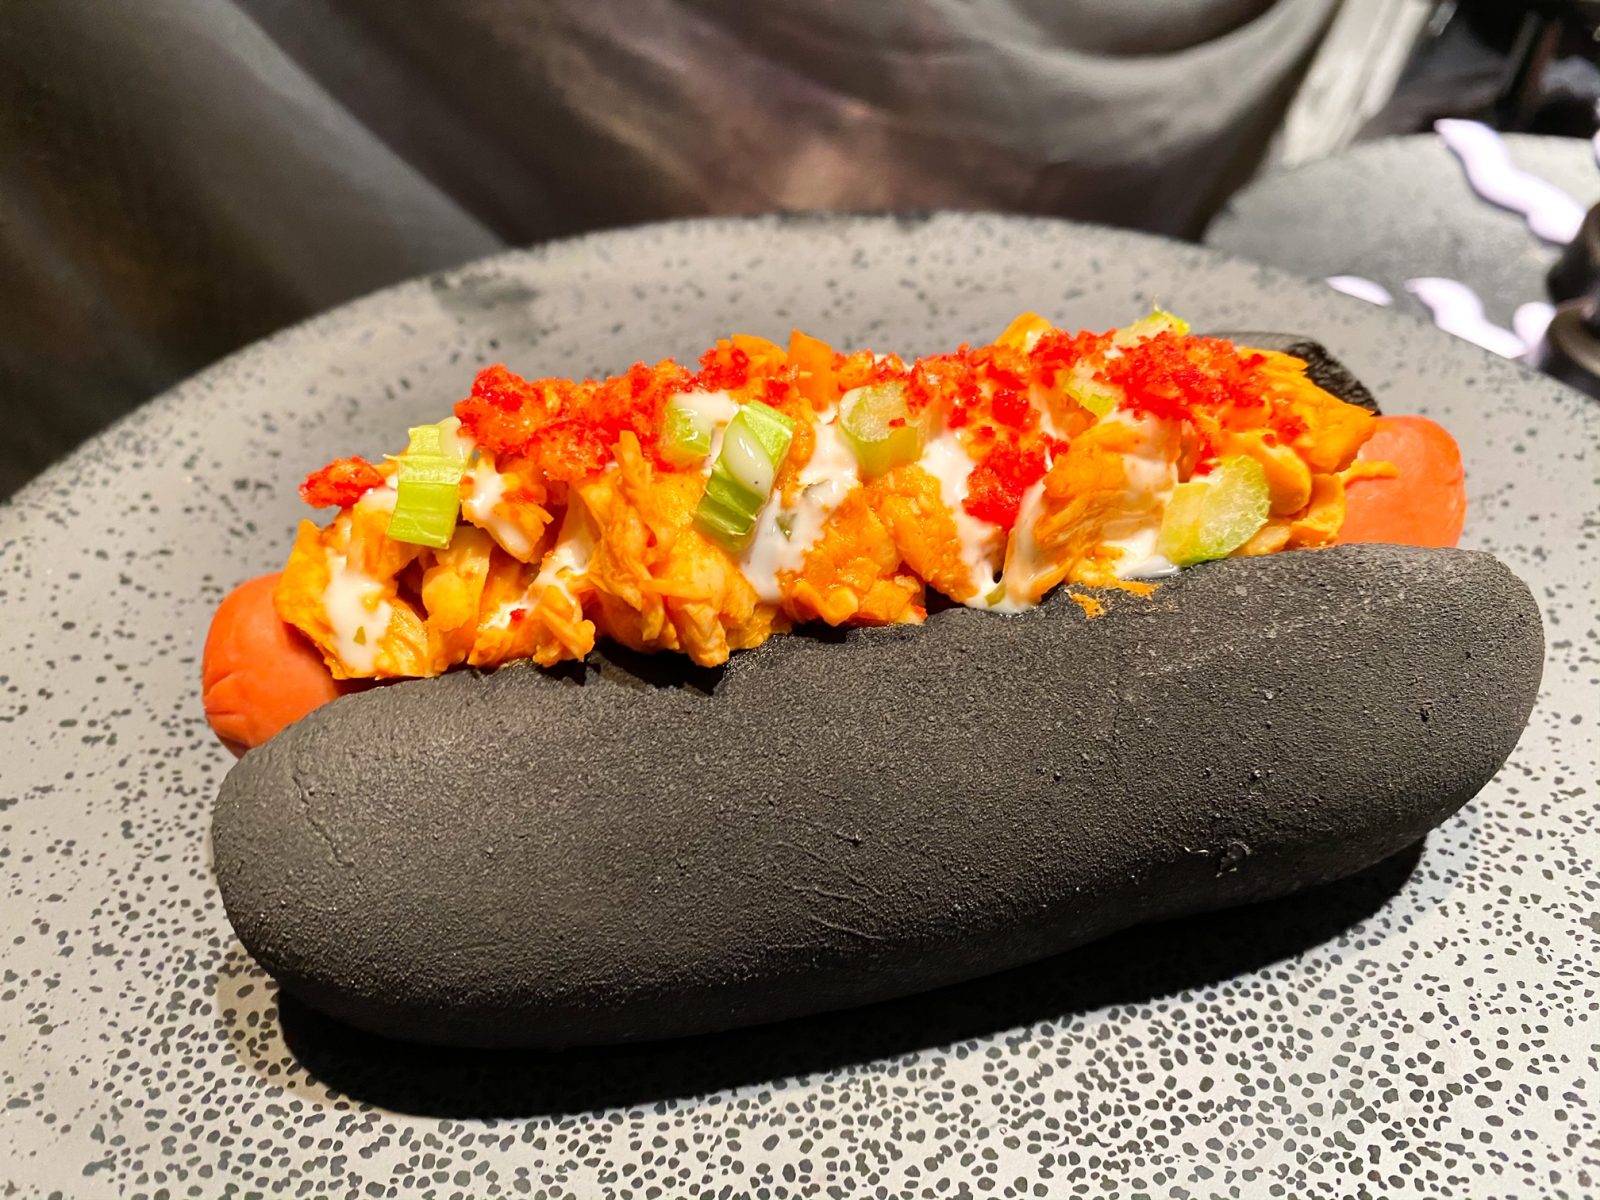 the black hades hot dog at Villains after hours